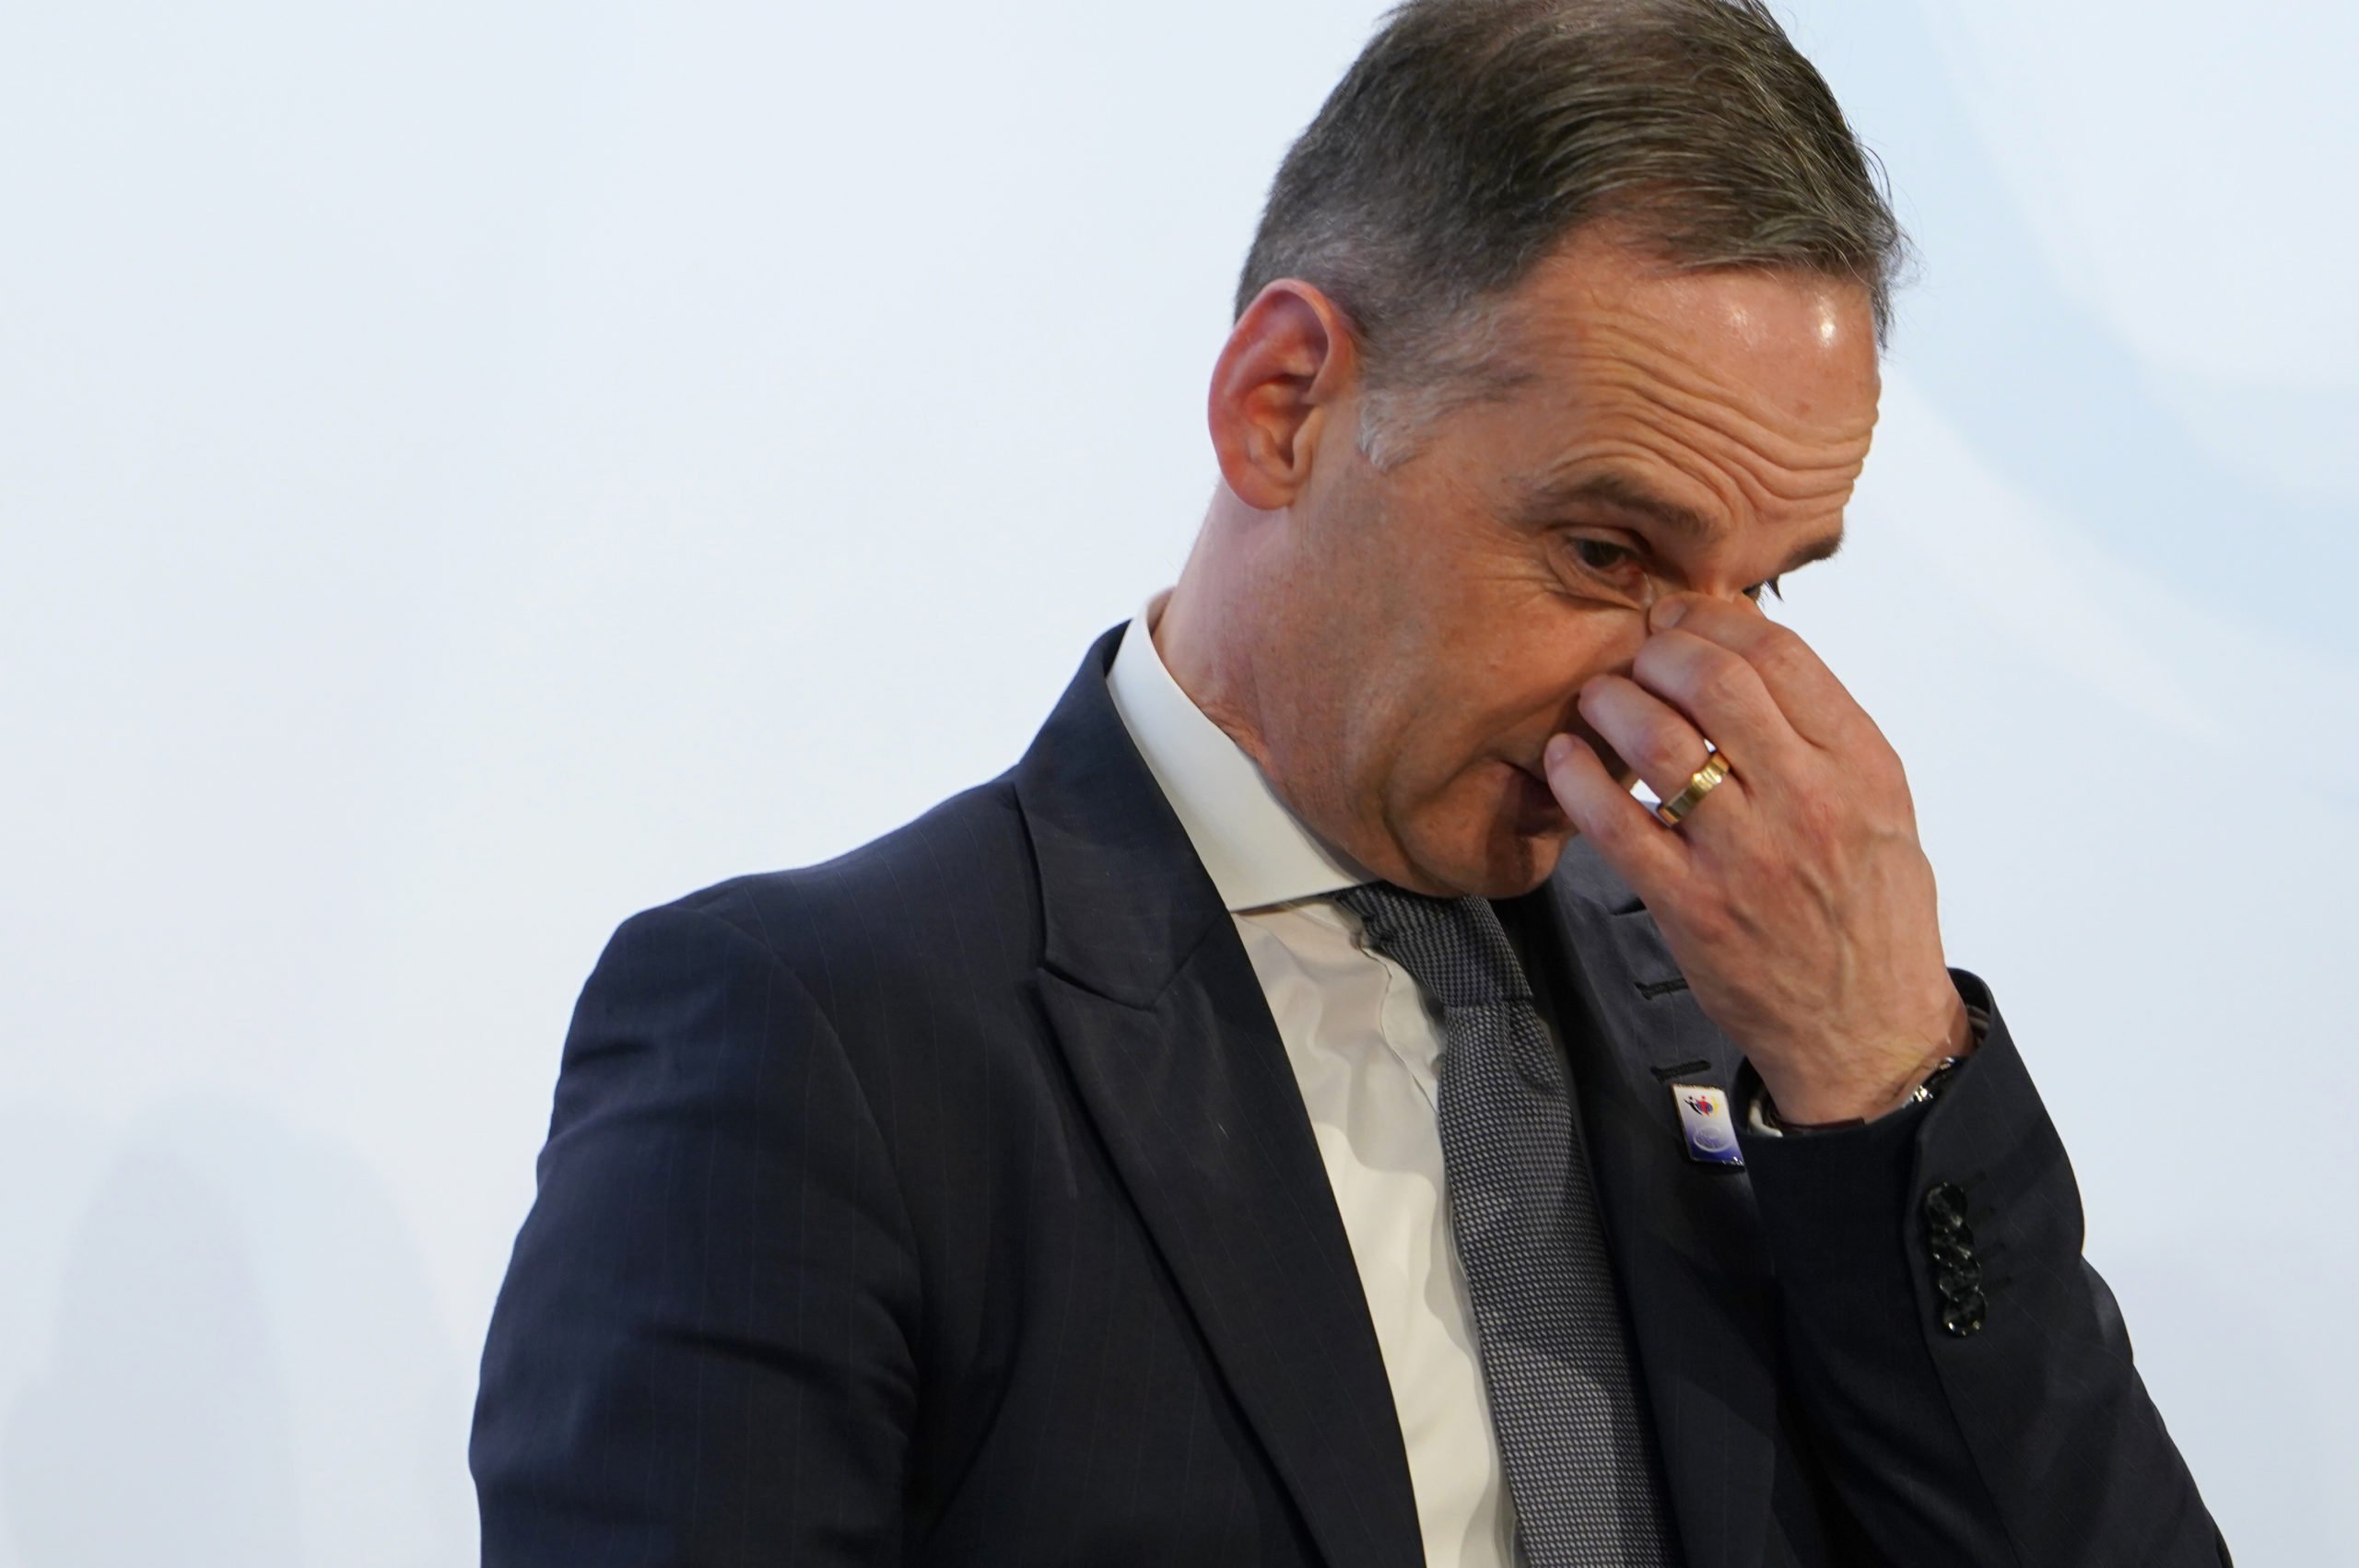 Heiko Maas (SPD), Federal Minister of Foreign Affairs, holds his nose during a press conference. 